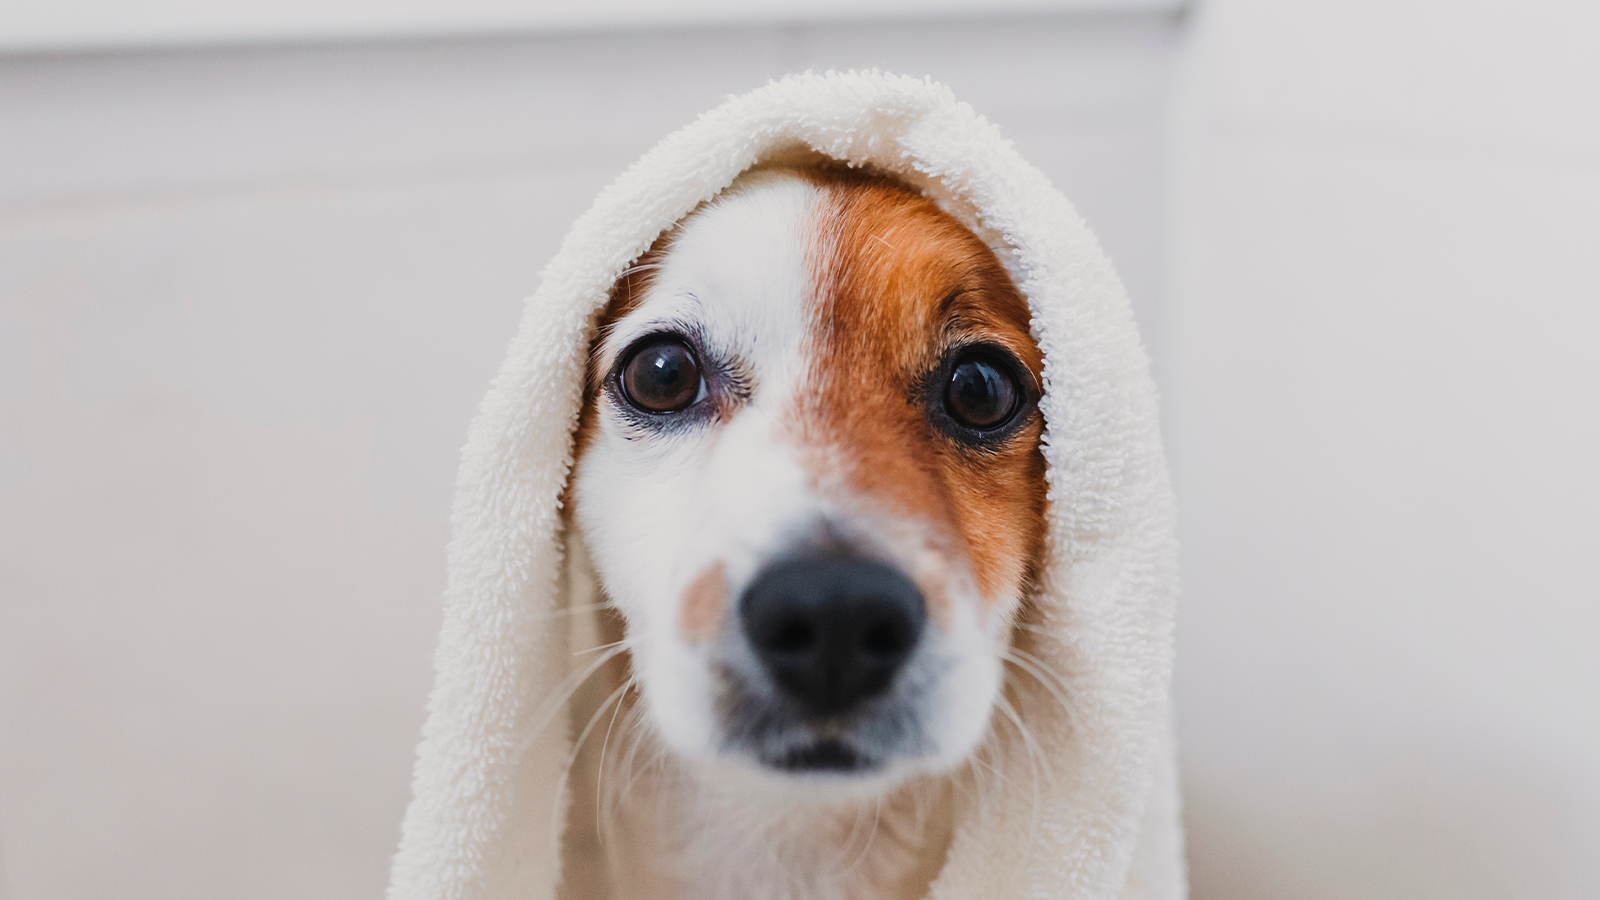 A dog with a white towel draped over its head.